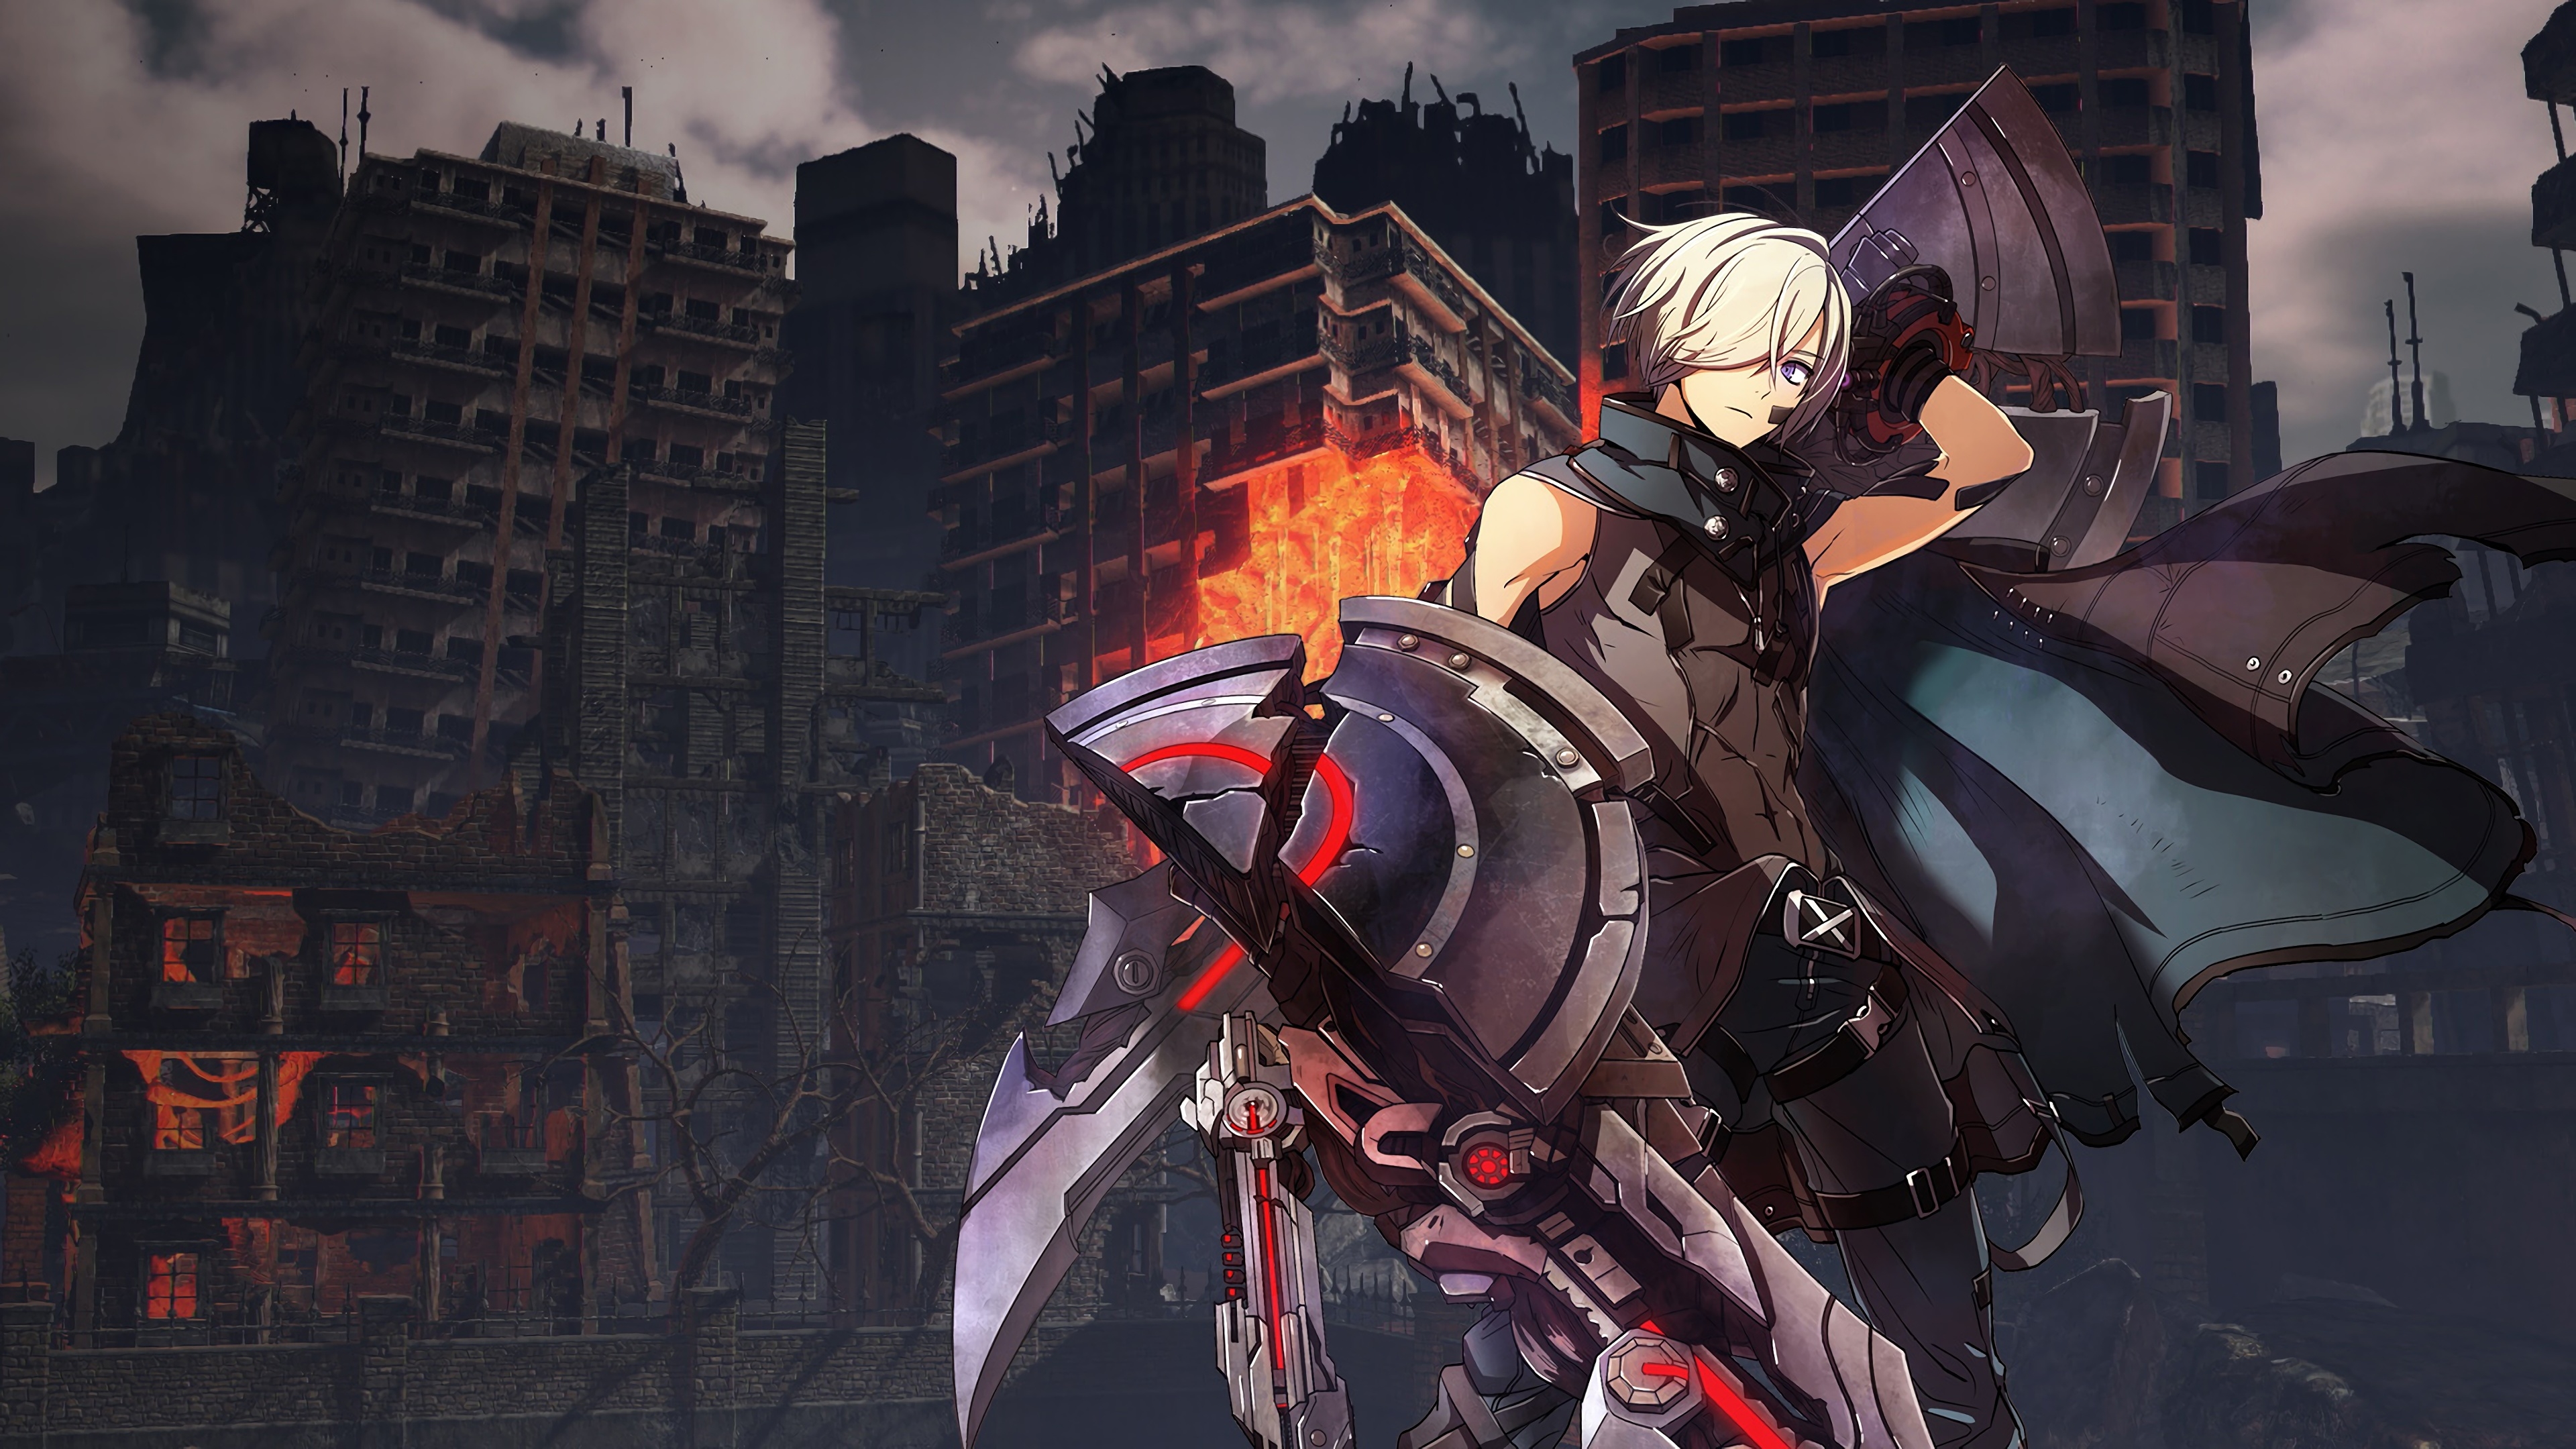 1242x26 God Eater 3 4k Iphone Xs Max Wallpaper Hd Games 4k Wallpapers Images Photos And Background Wallpapers Den